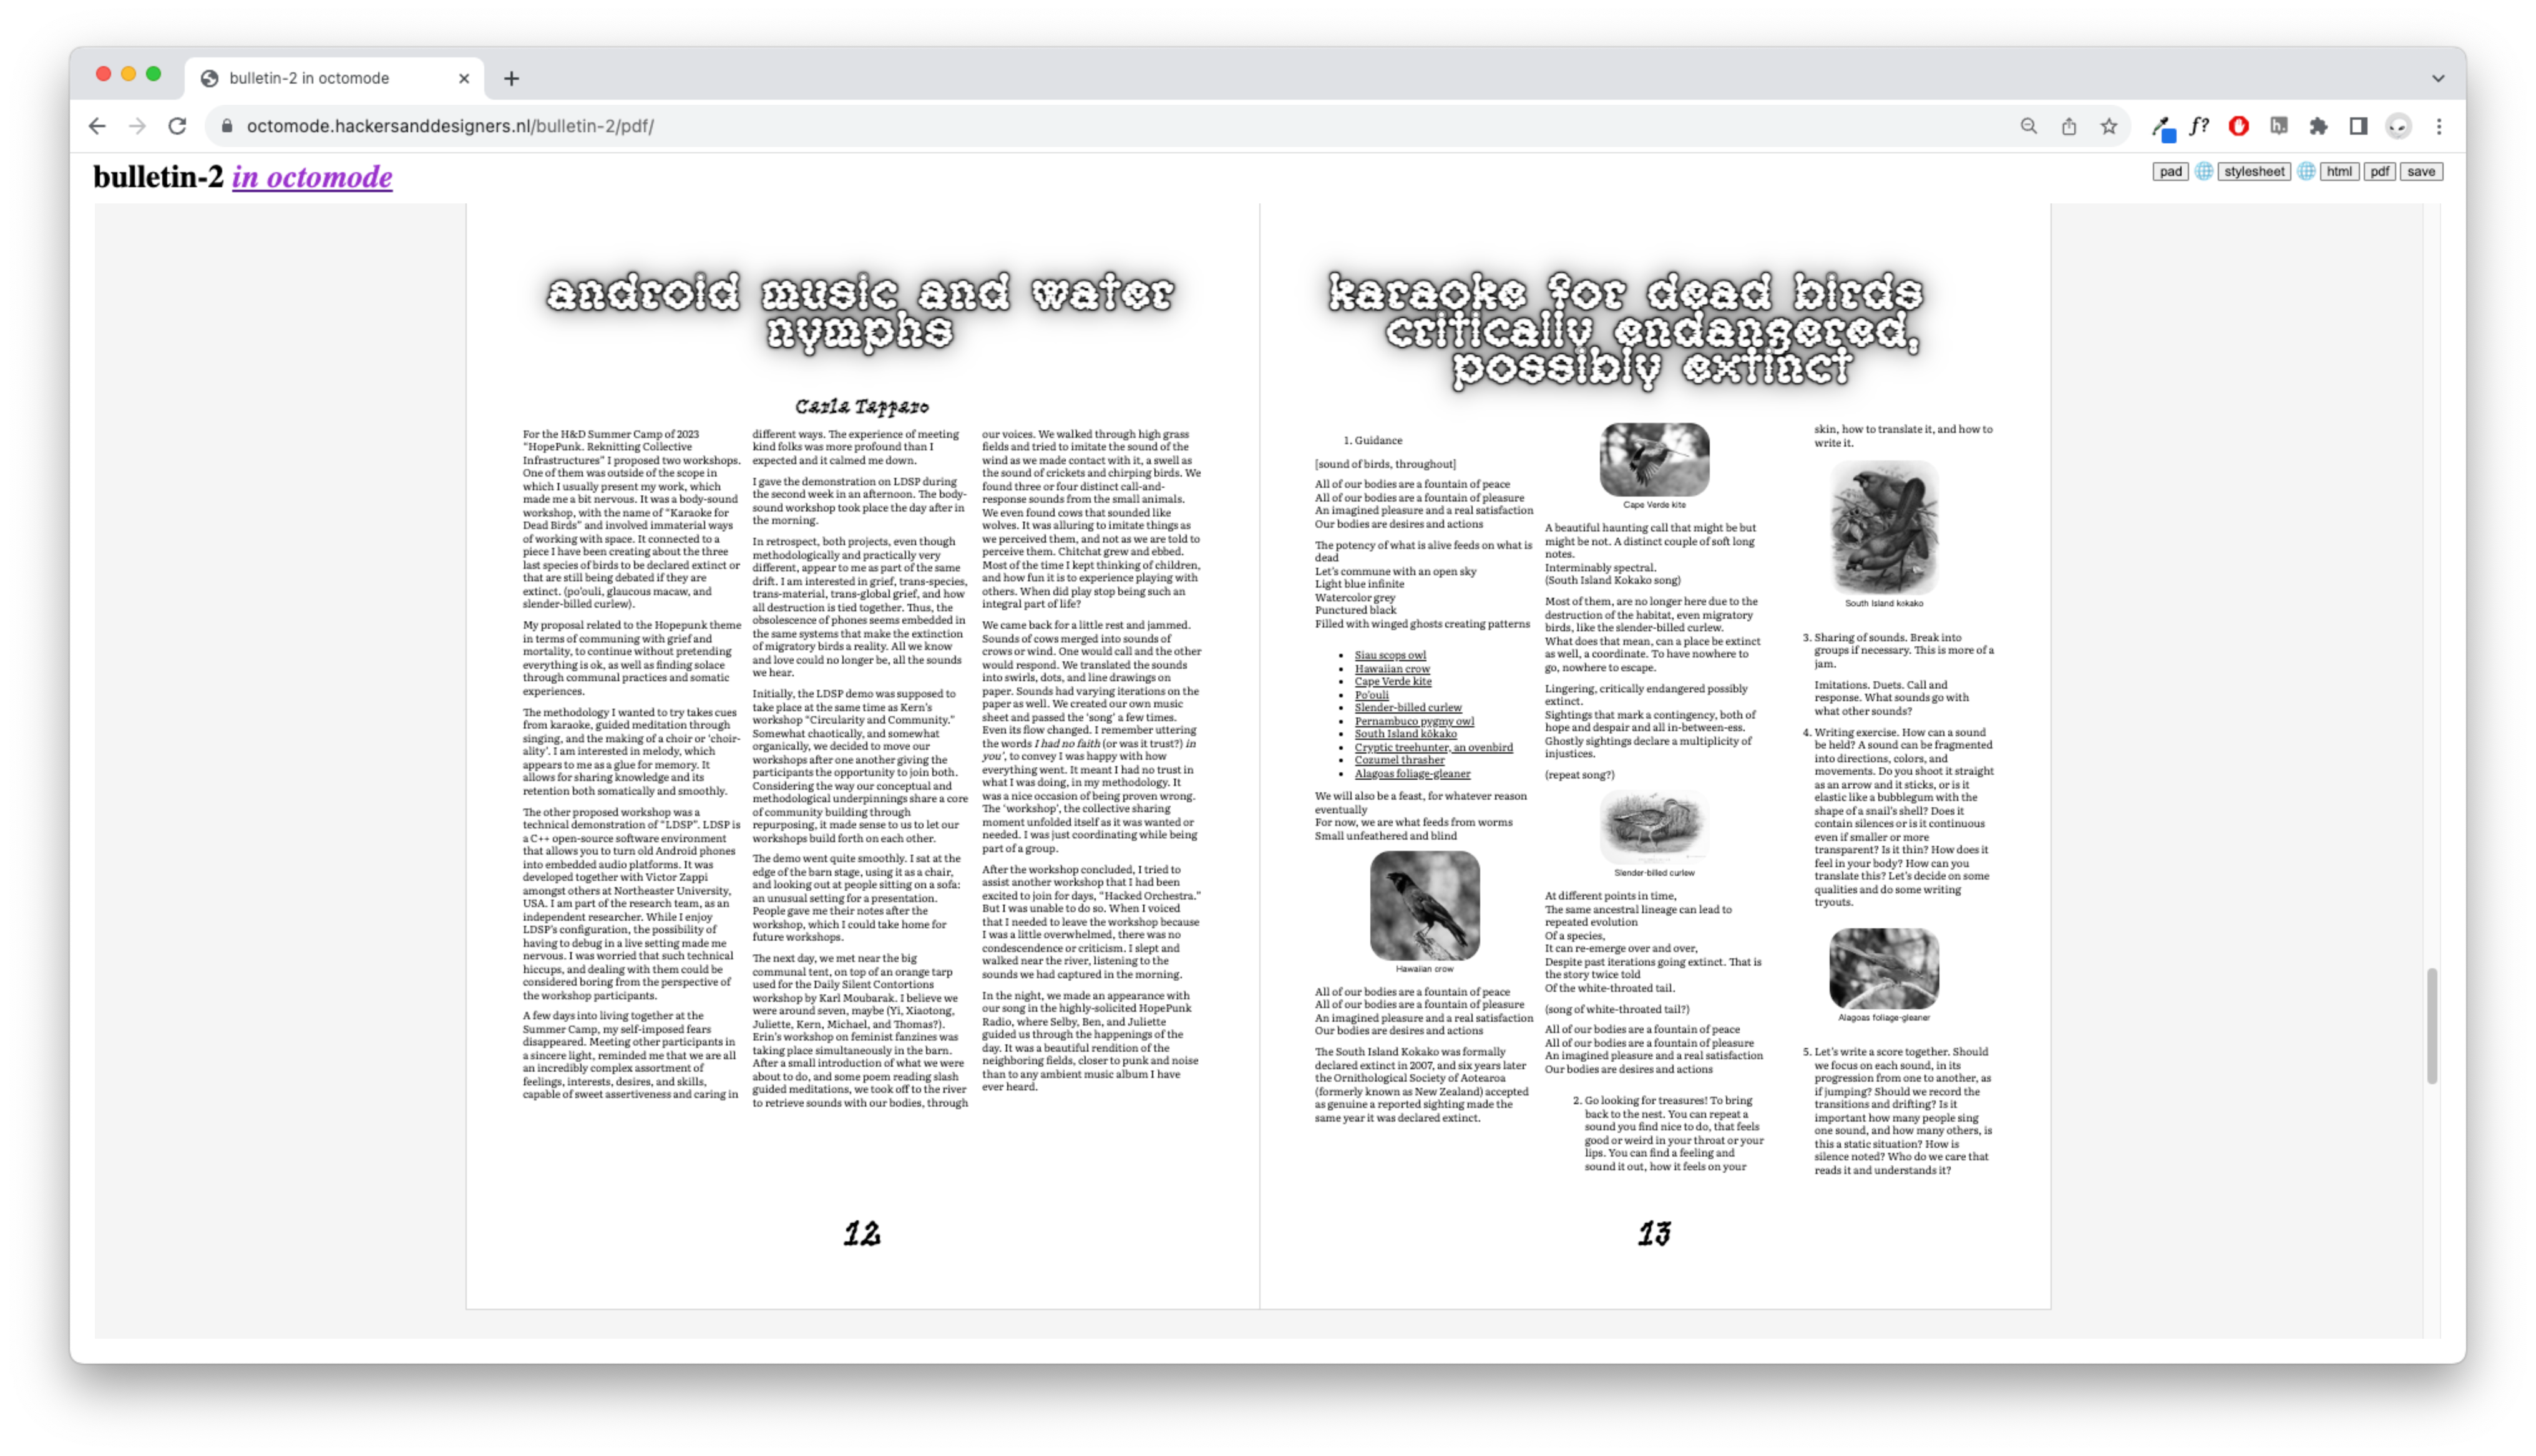 A double page of the H&D Bulletin #2 rendered in the browser. On view is the contribution of Carla Tapparo "Android Music and Water Nymphs" in the left page and "Karaoke for dead birds — Critically endangered, possibly extinct" on the right page. The text is designed in a 3 column layout. On the right page there are images of small birds scattered throughout the text.